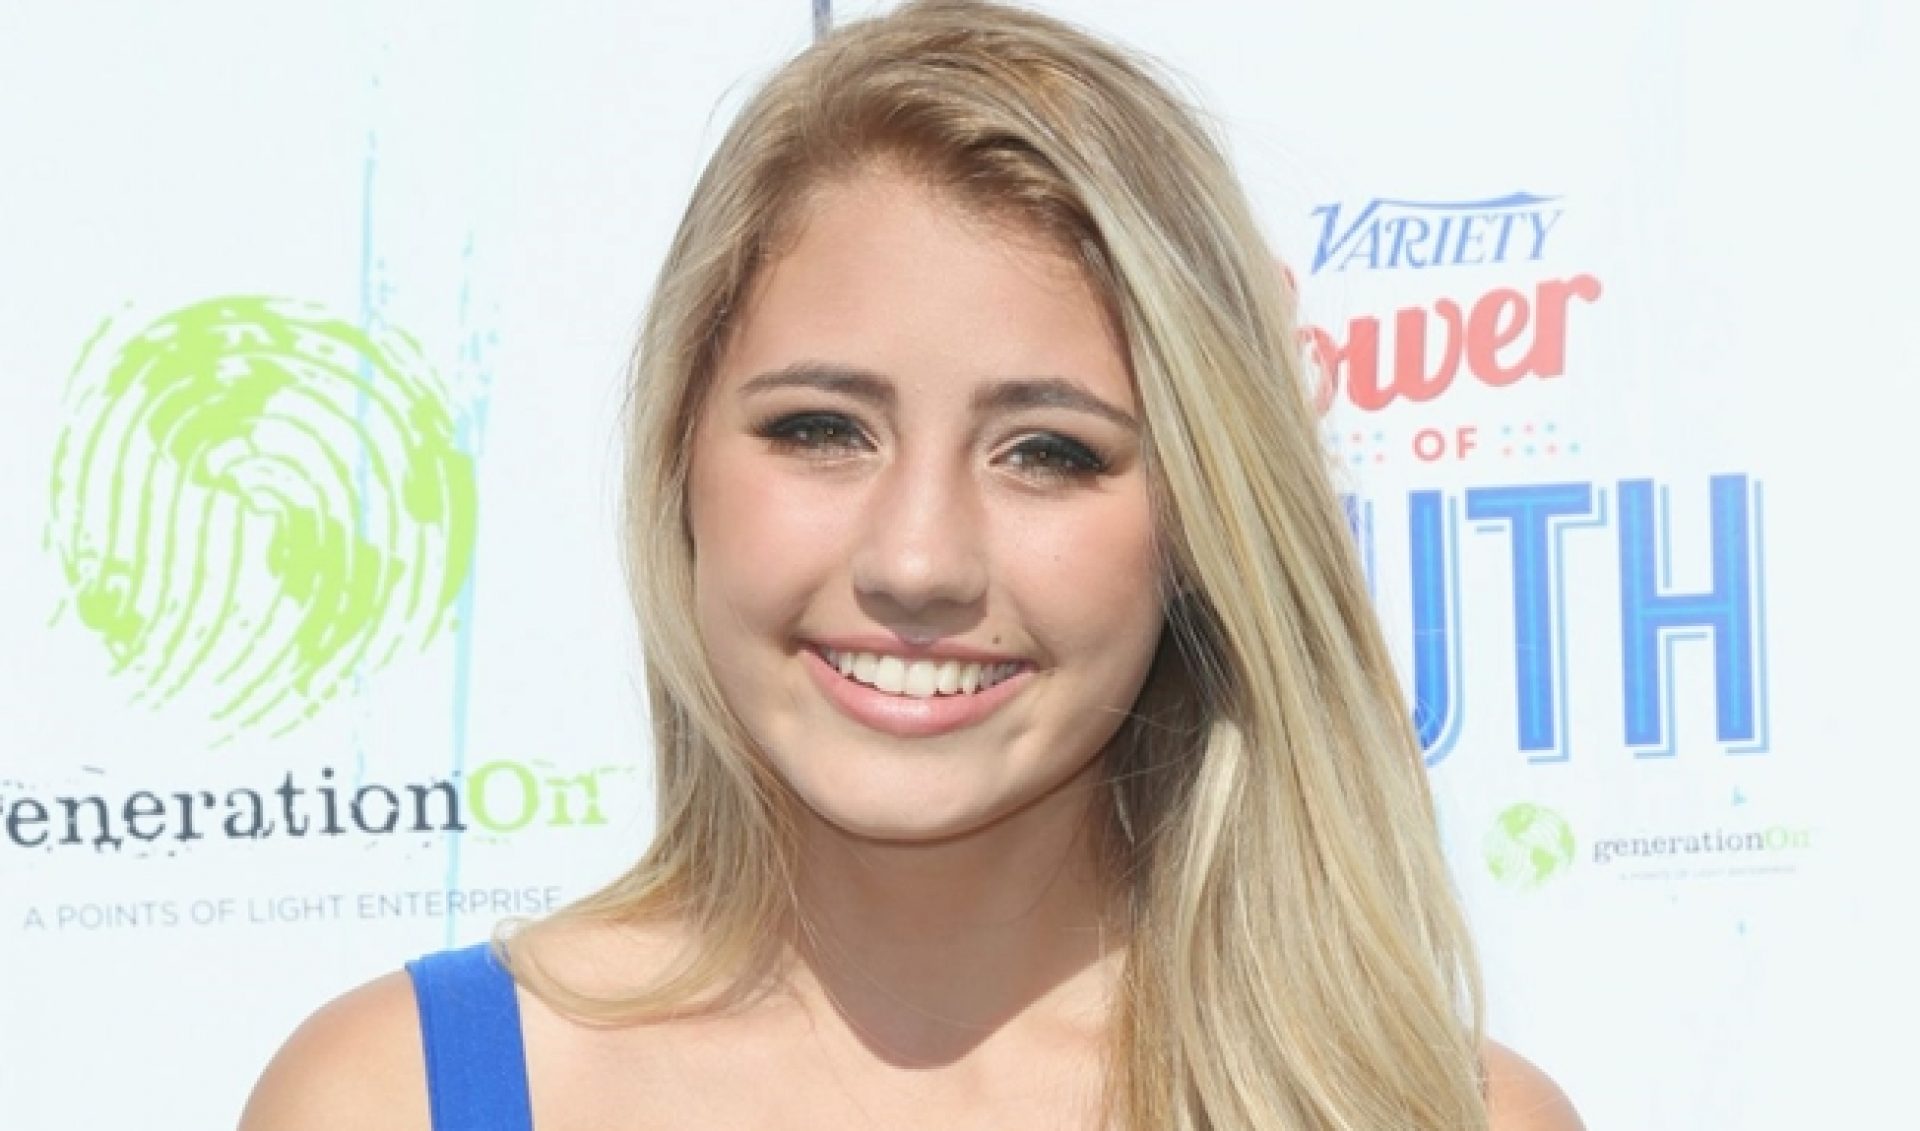 YouTube Millionaires: Lia Marie Johnson Is “Going With The Flow”